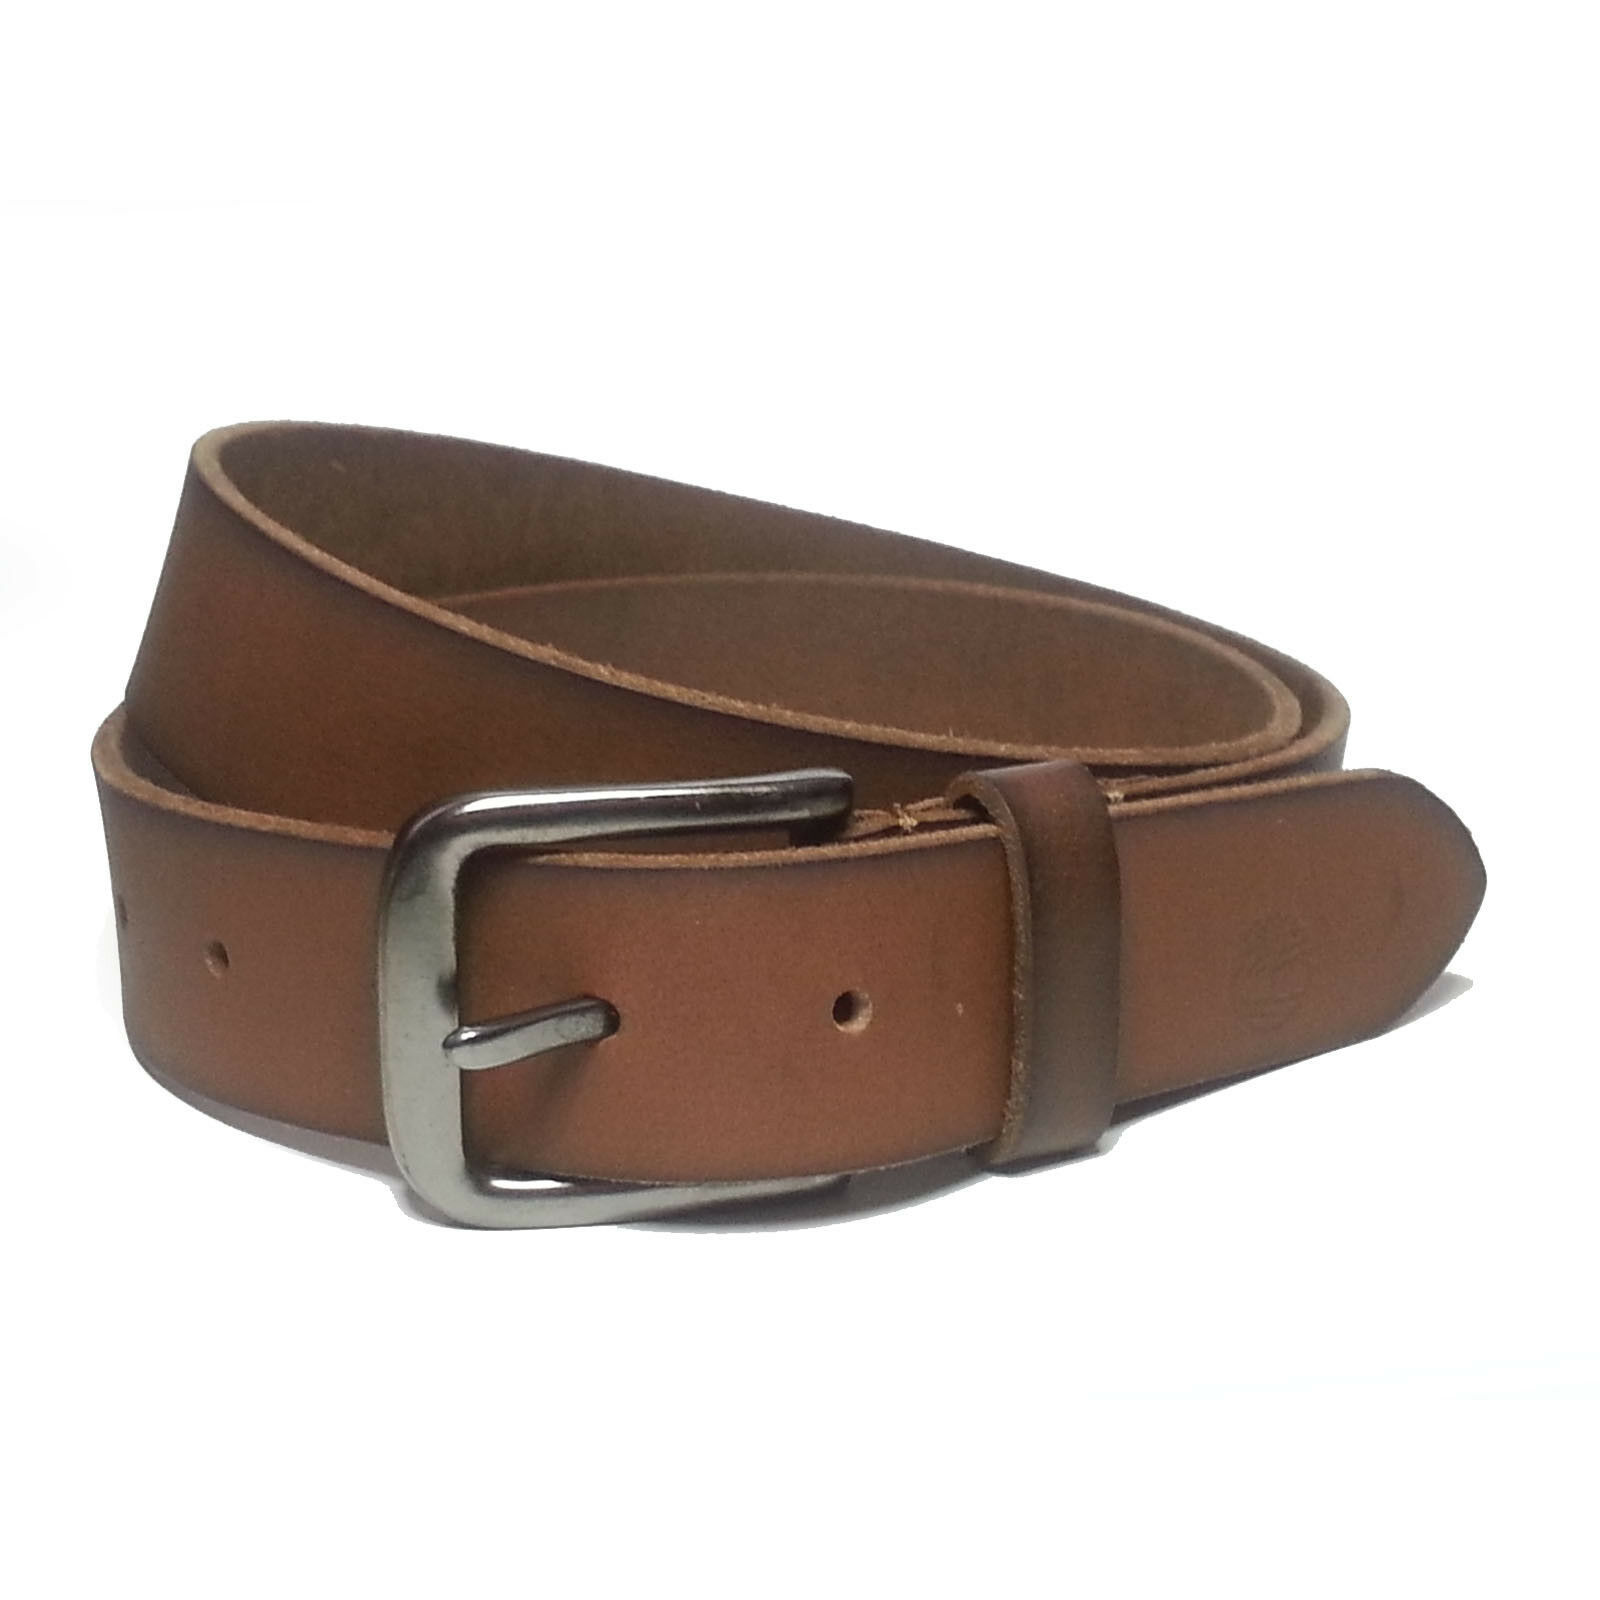 Timberland Men Size 34 Brown Leather Belt 35mm wide INDIA - $38.75